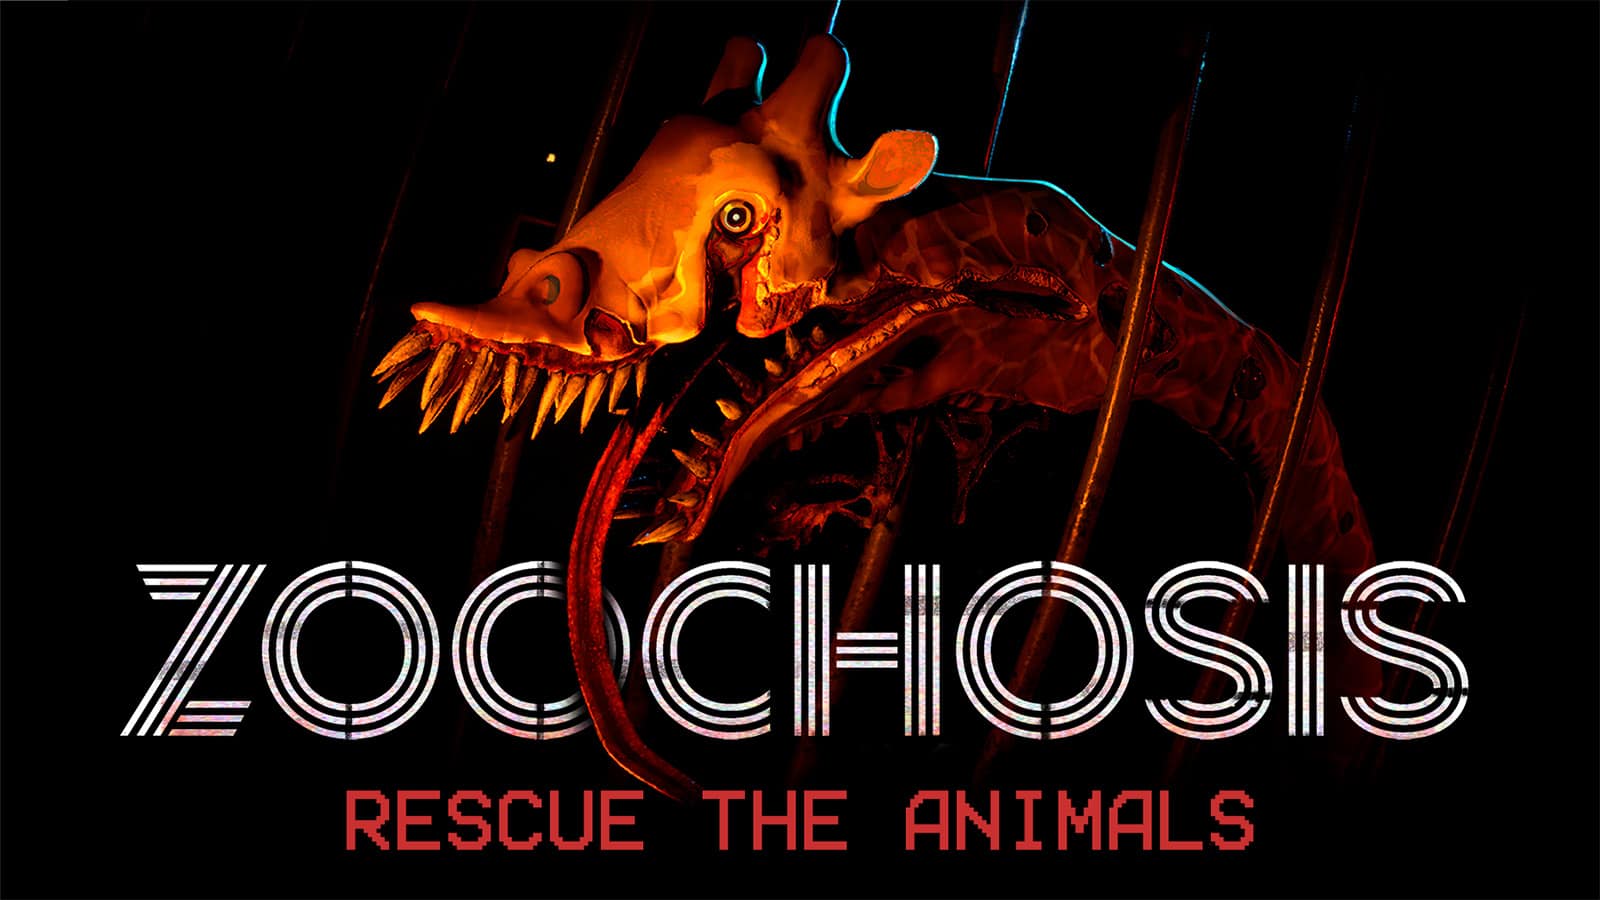 Zookeeper Horror Game Zoochosis Gets New Gameplay Trailer